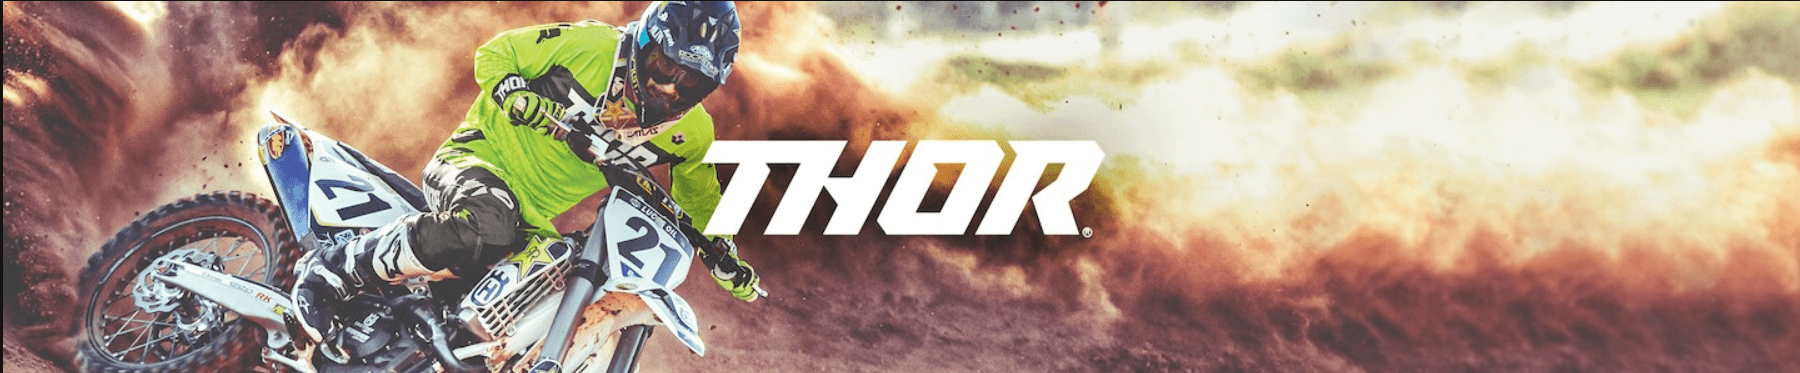 Thor-Mx-dirt-bike-riding-gear-brands-for-adults-2022